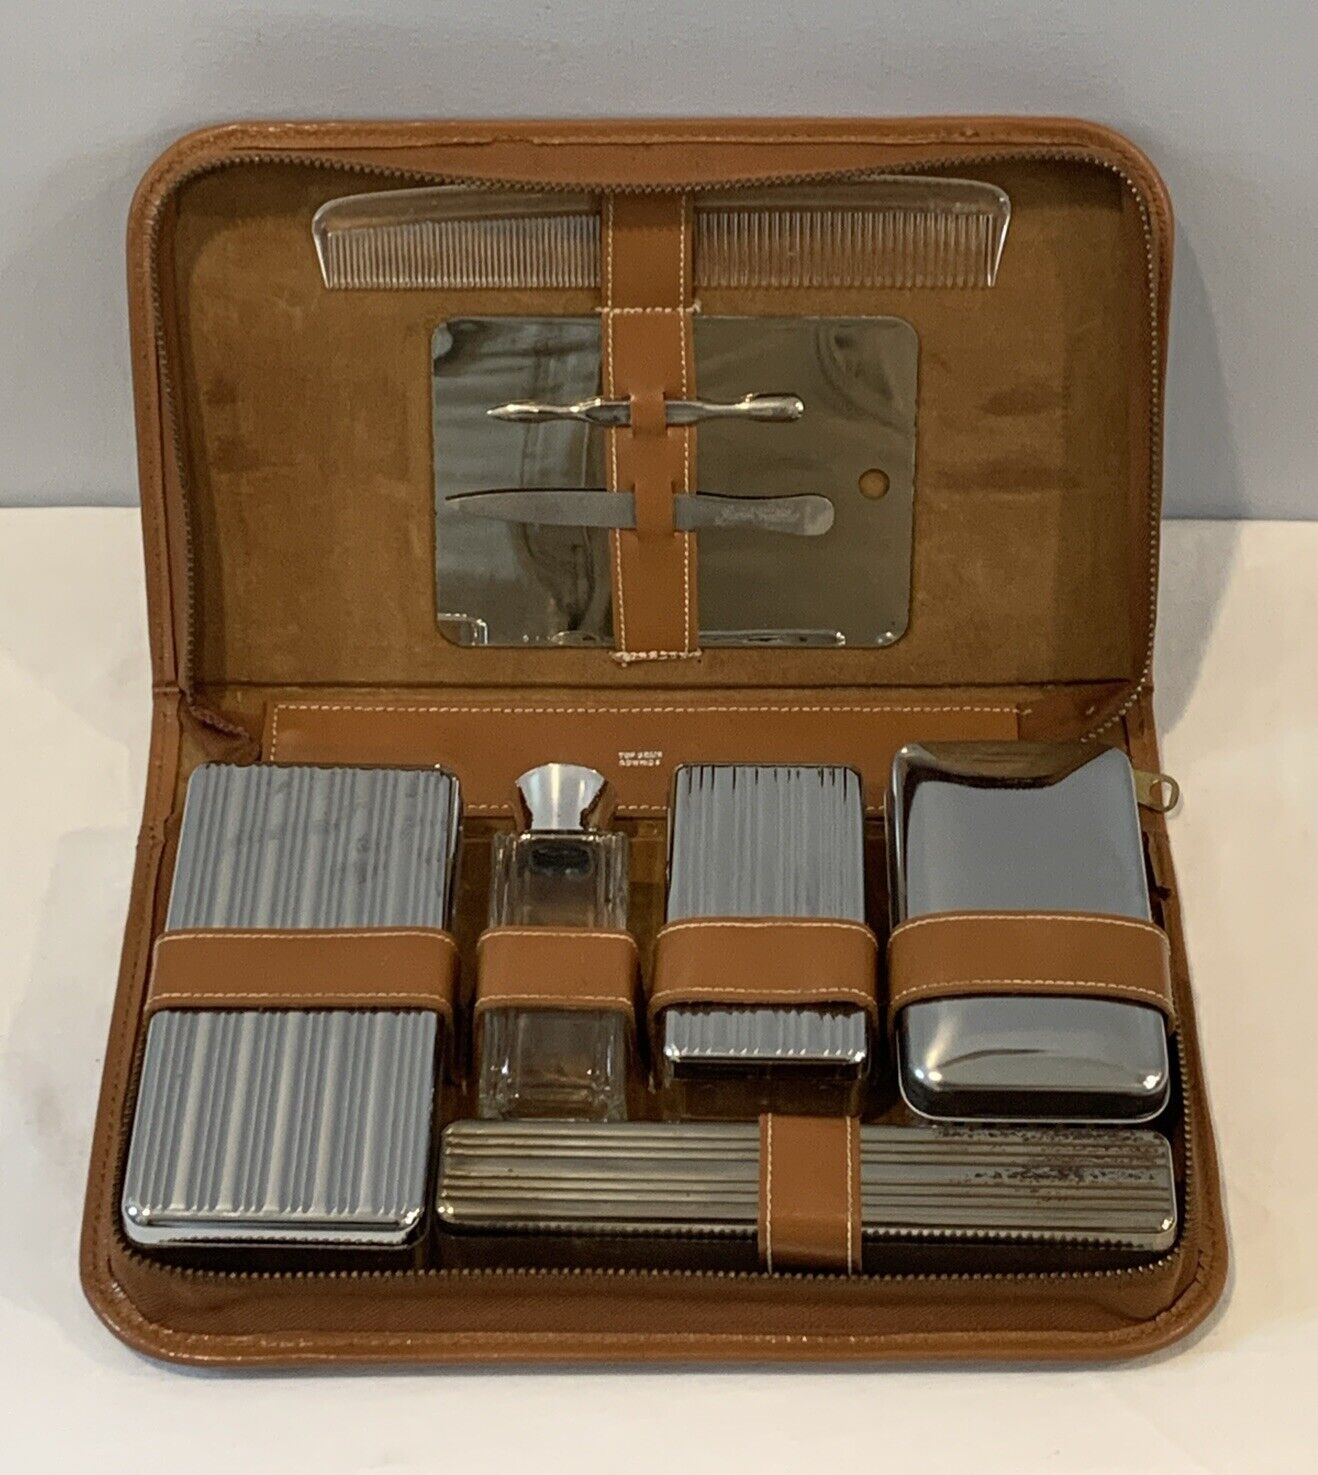 Vintage 10 Piece Leather Travel Grooming Bath Set In Zip Up Case Complete Rare